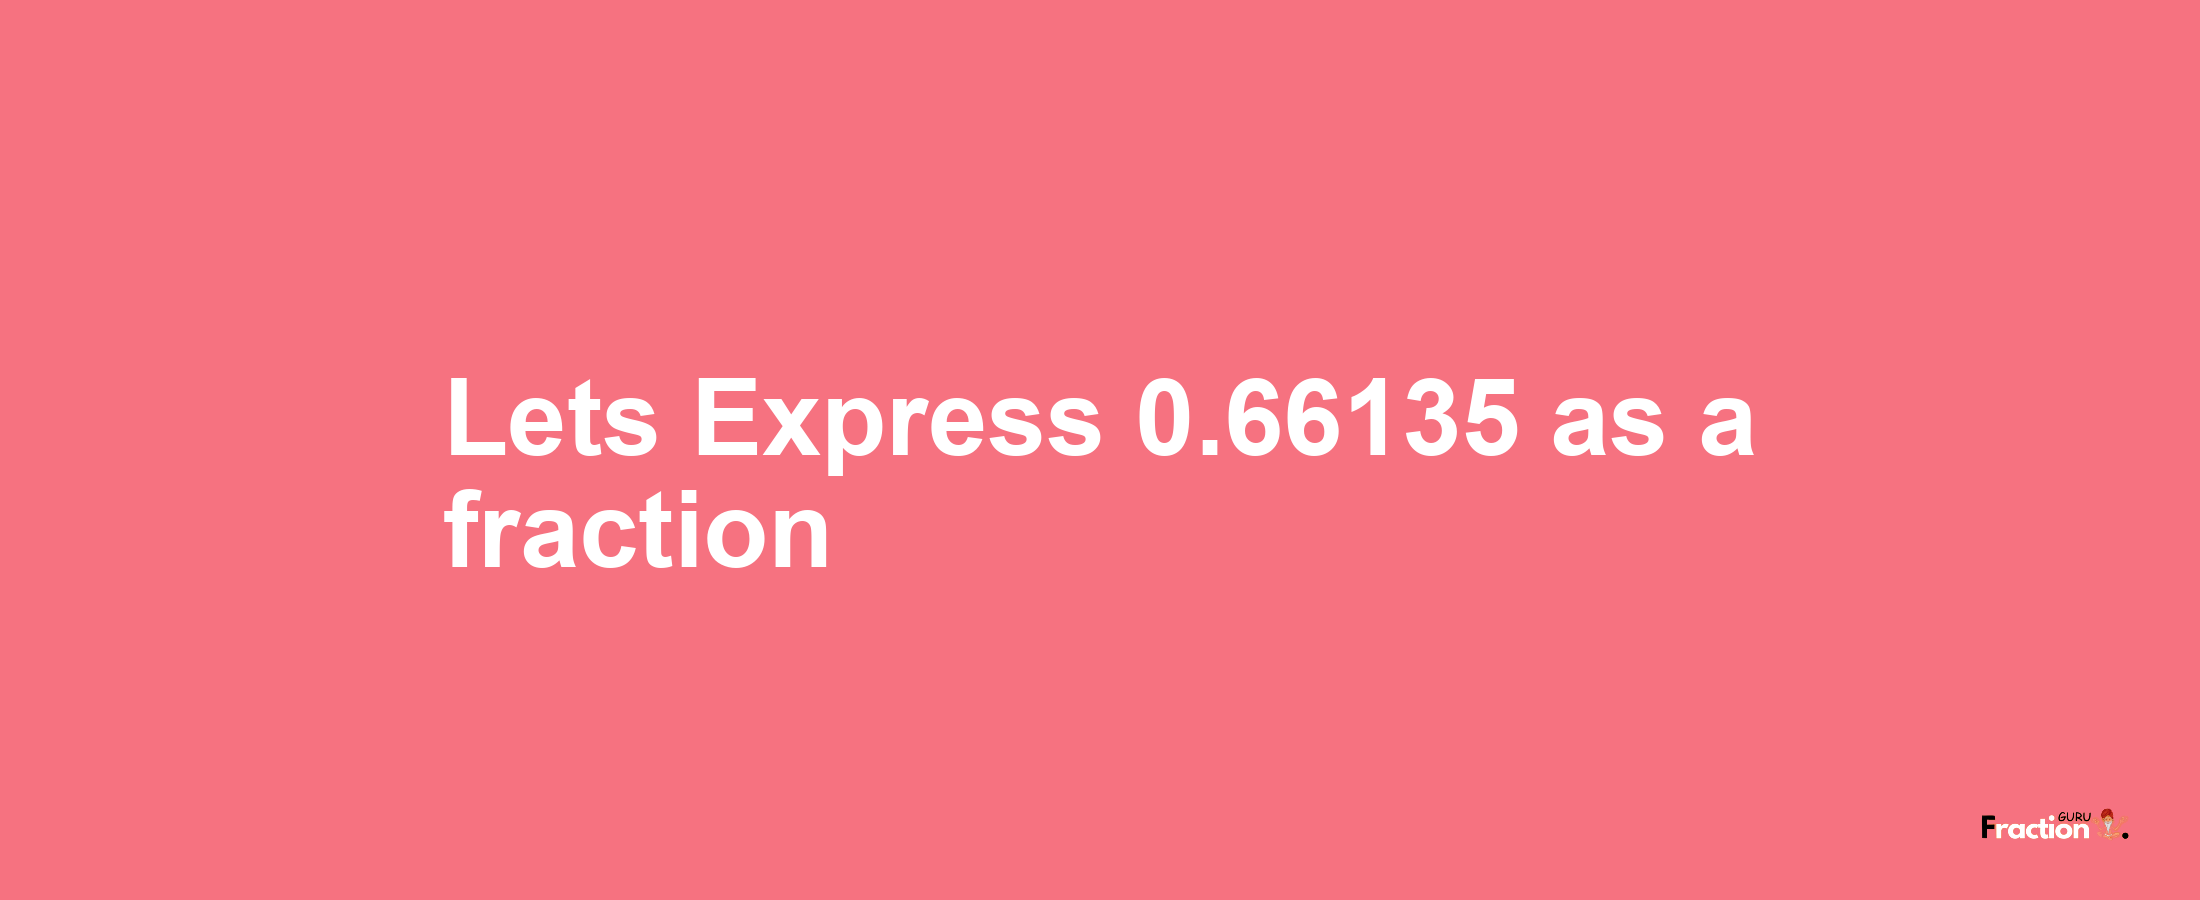 Lets Express 0.66135 as afraction